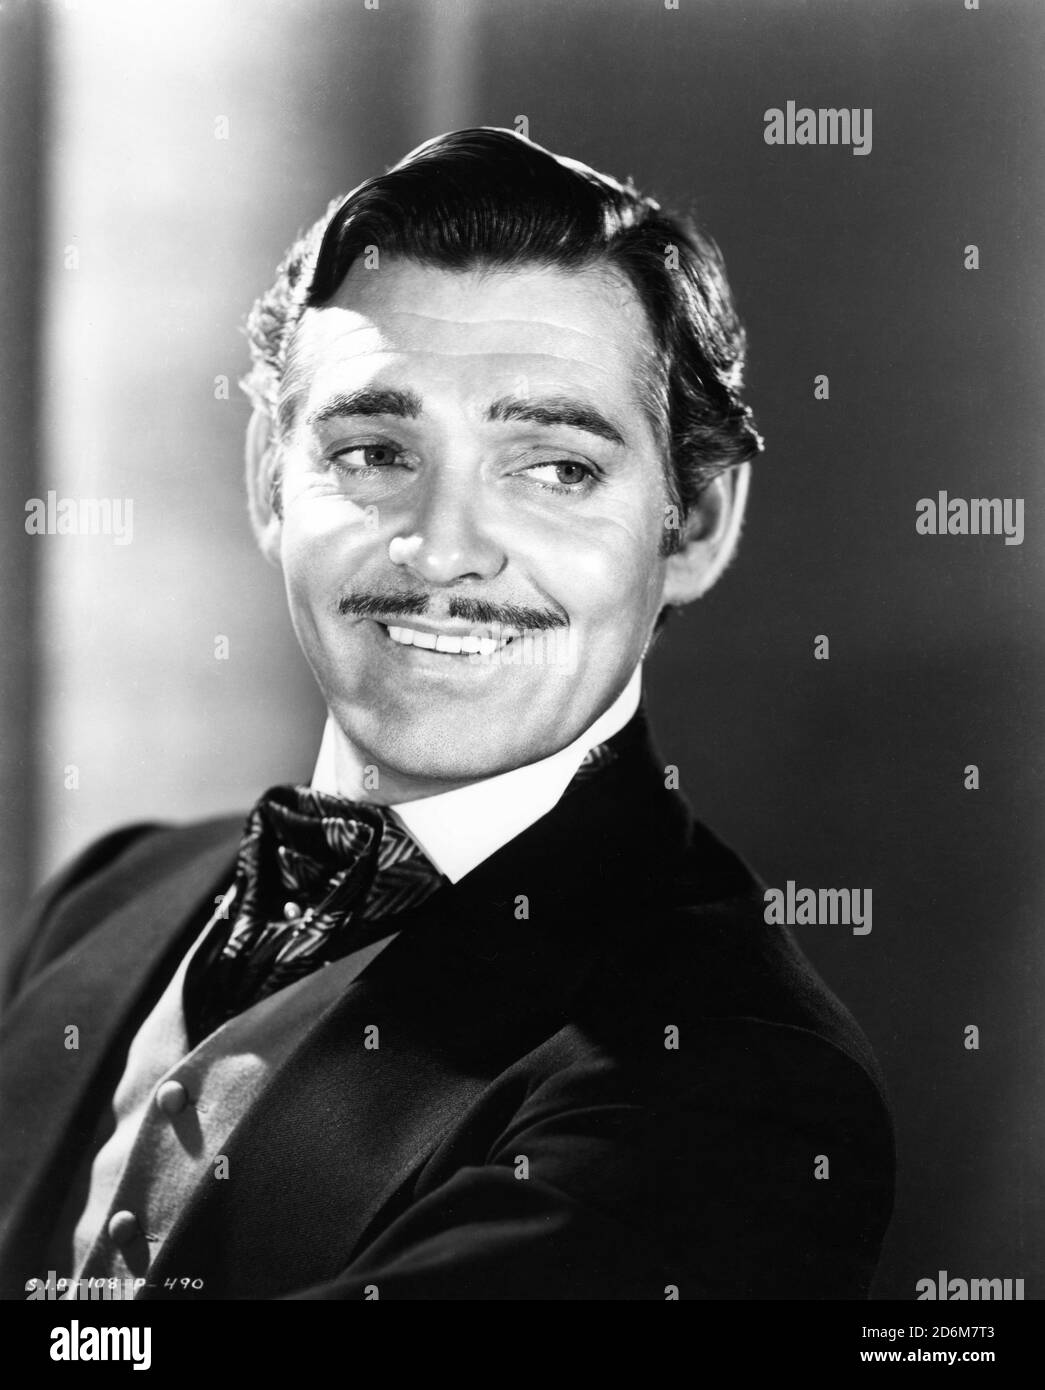 CLARK GABLE publicity portrait as Rhett Butler for GONE WITH THE WIND 1939 director VICTOR FLEMING novel Margaret Mitchell music Max Steiner costumes Walter Plunkett producer David O. Selznick Selznick International Pictures / Metro Goldwyn Mayer Stock Photo